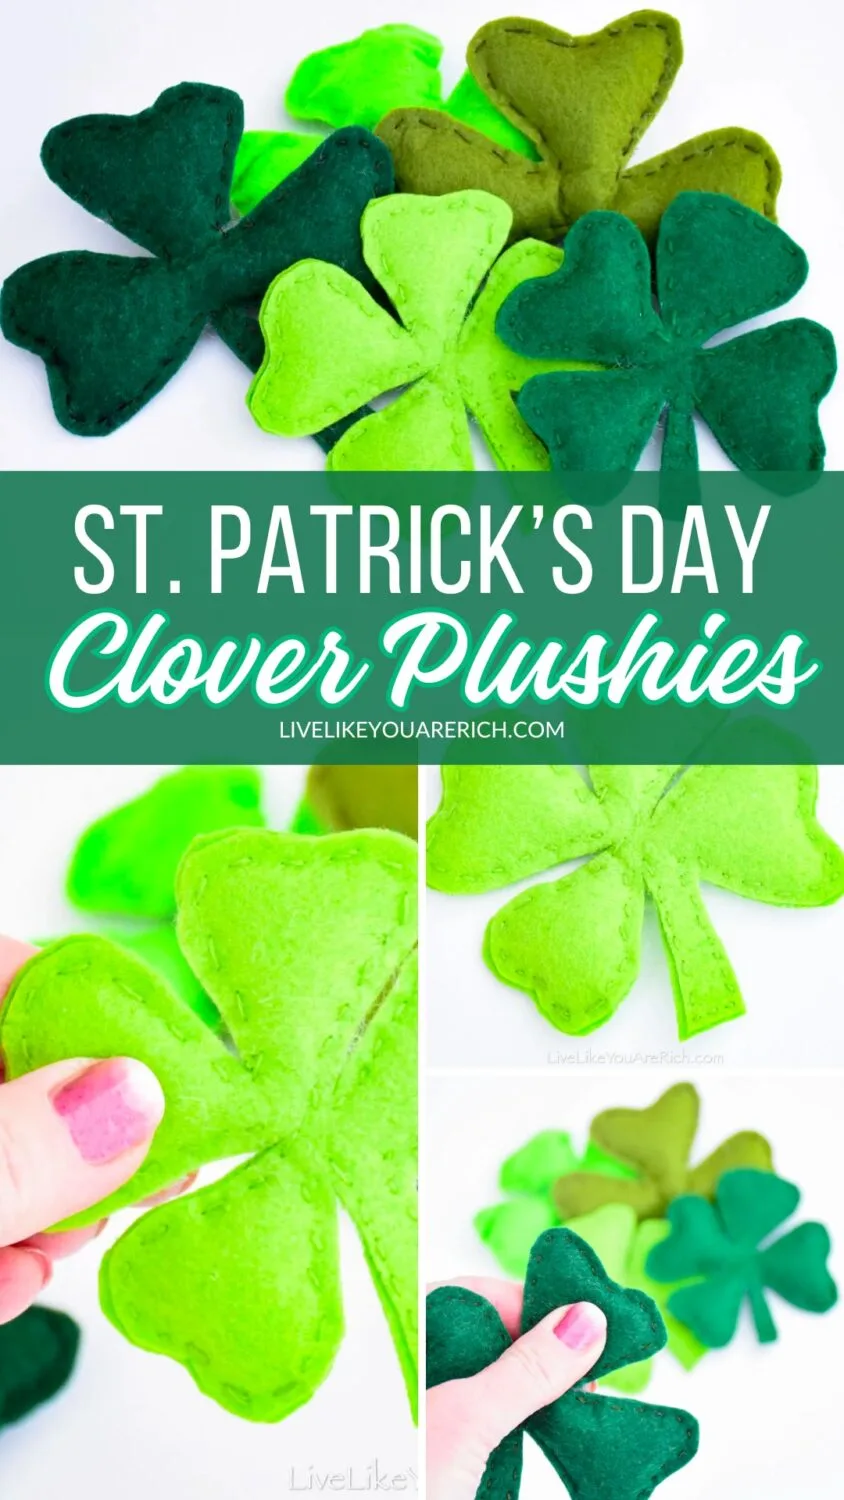 St. Patrick’s Day Clover Plushies